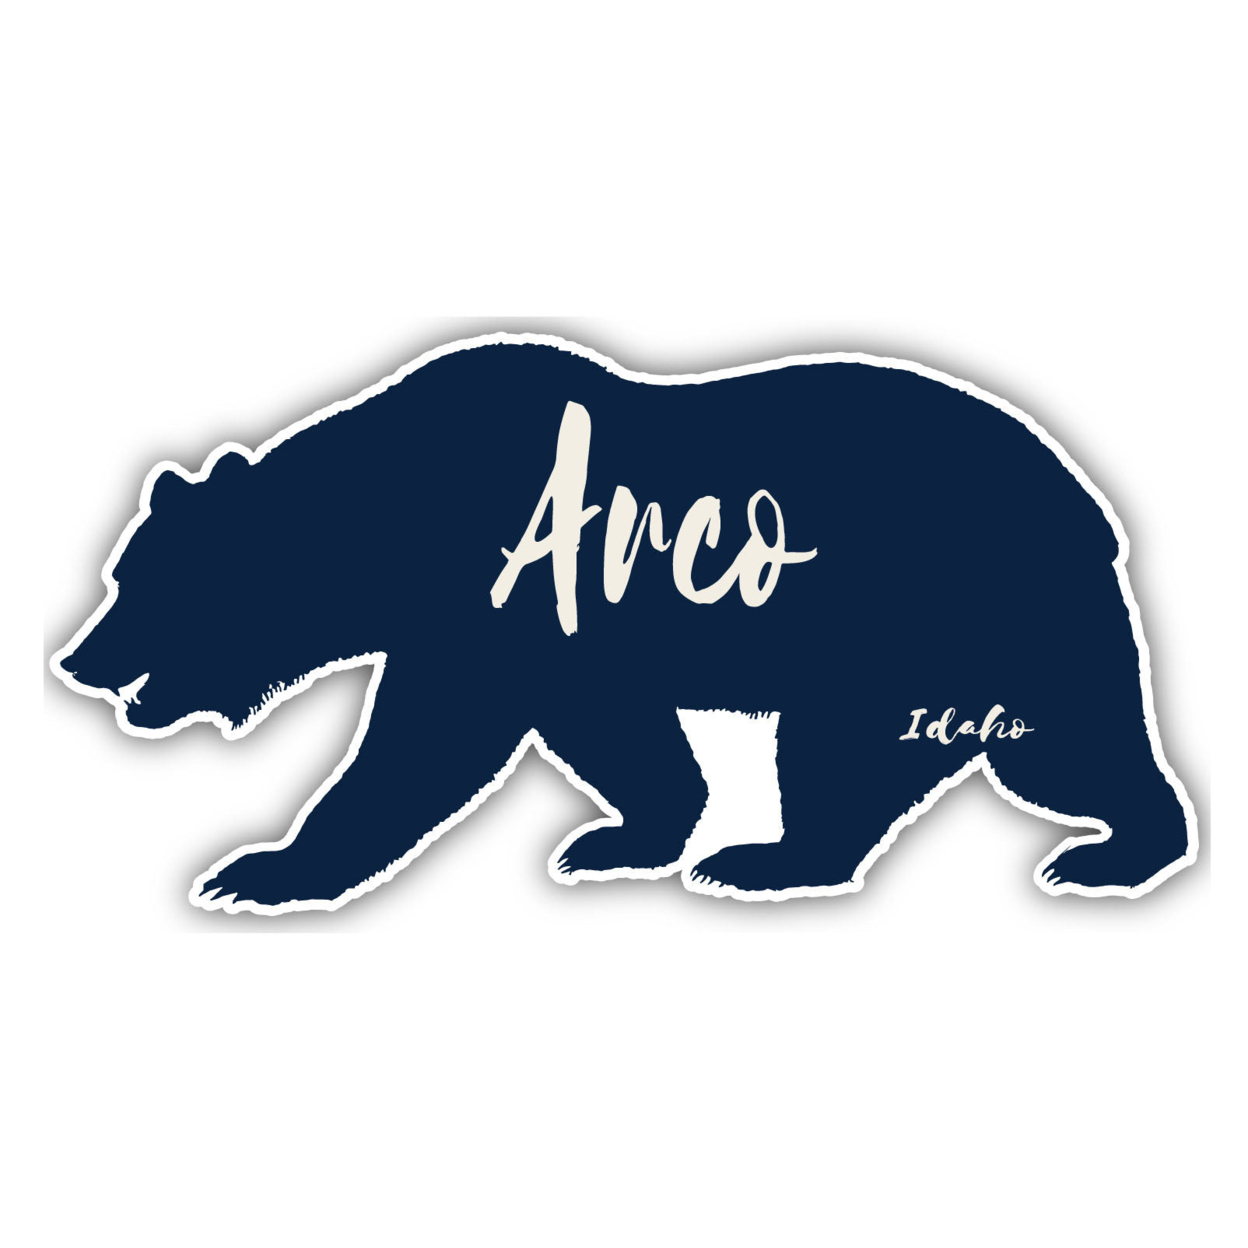 Arco Idaho Souvenir Decorative Stickers (Choose Theme And Size) - Single Unit, 8-Inch, Great Outdoors